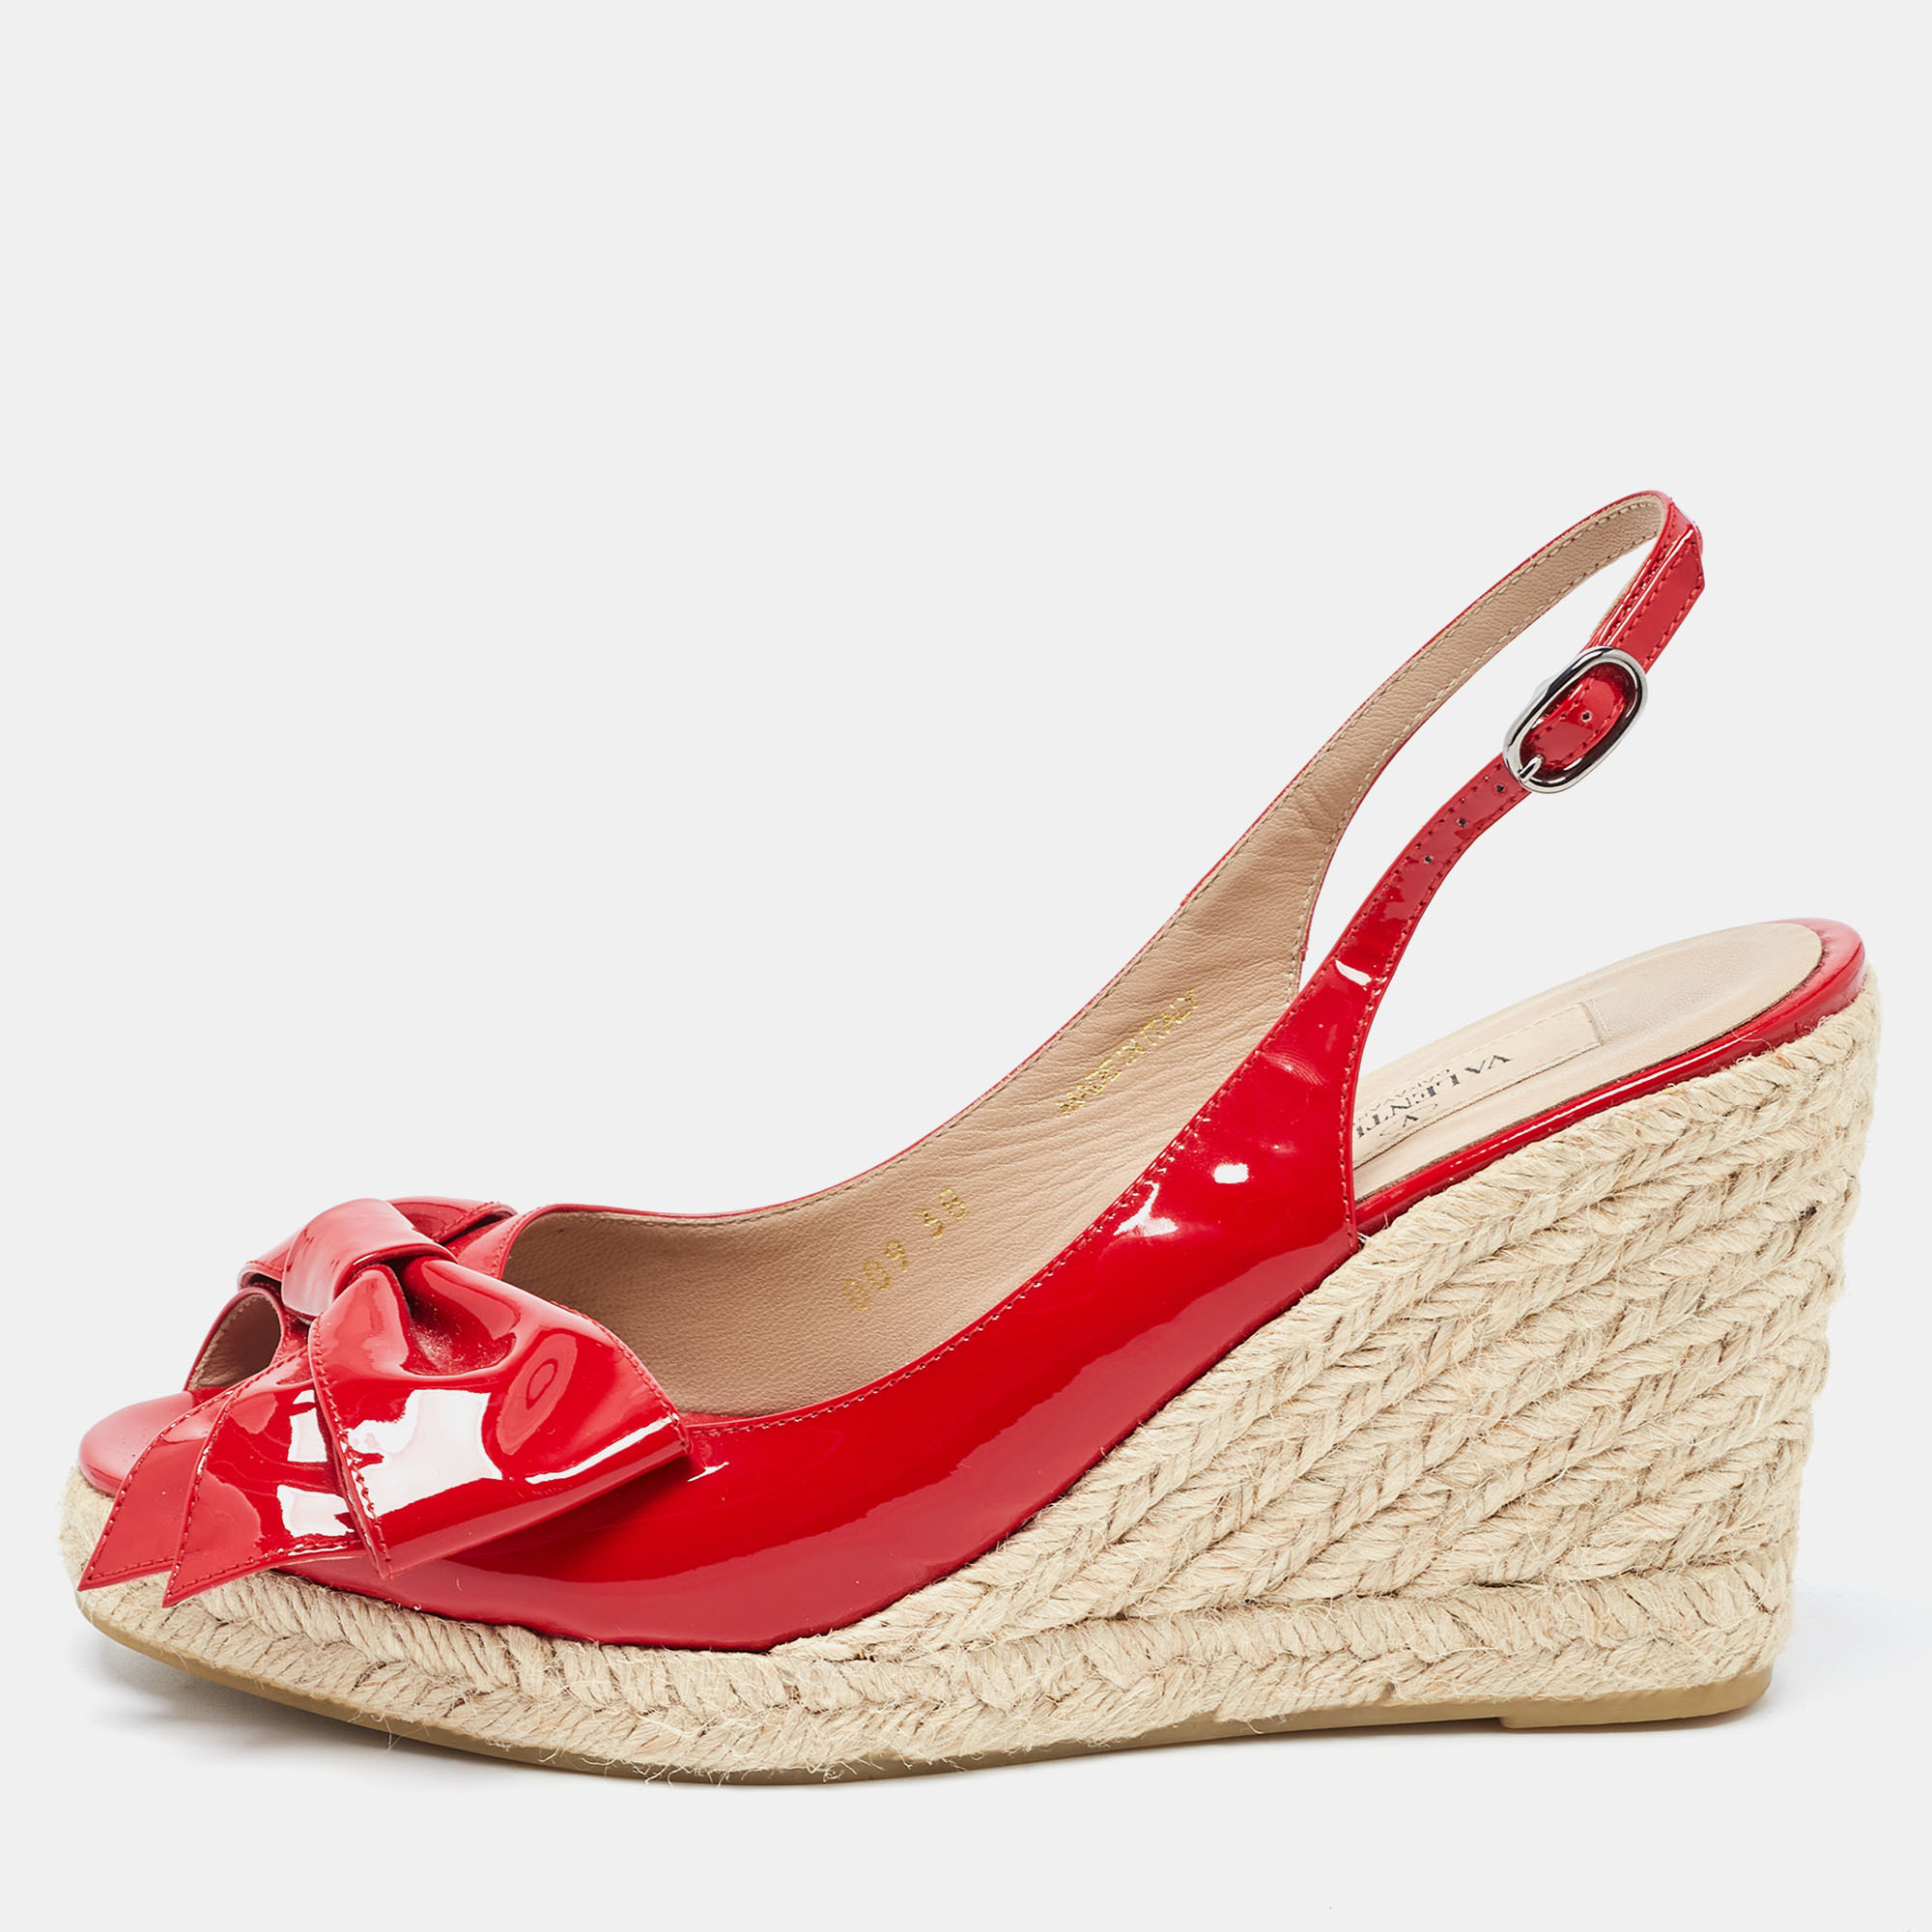 Pre-owned Valentino Garavani Red Patent Leather Mena Bow Peep Toe Espadrille Wedge Slingback Sandals Size 38